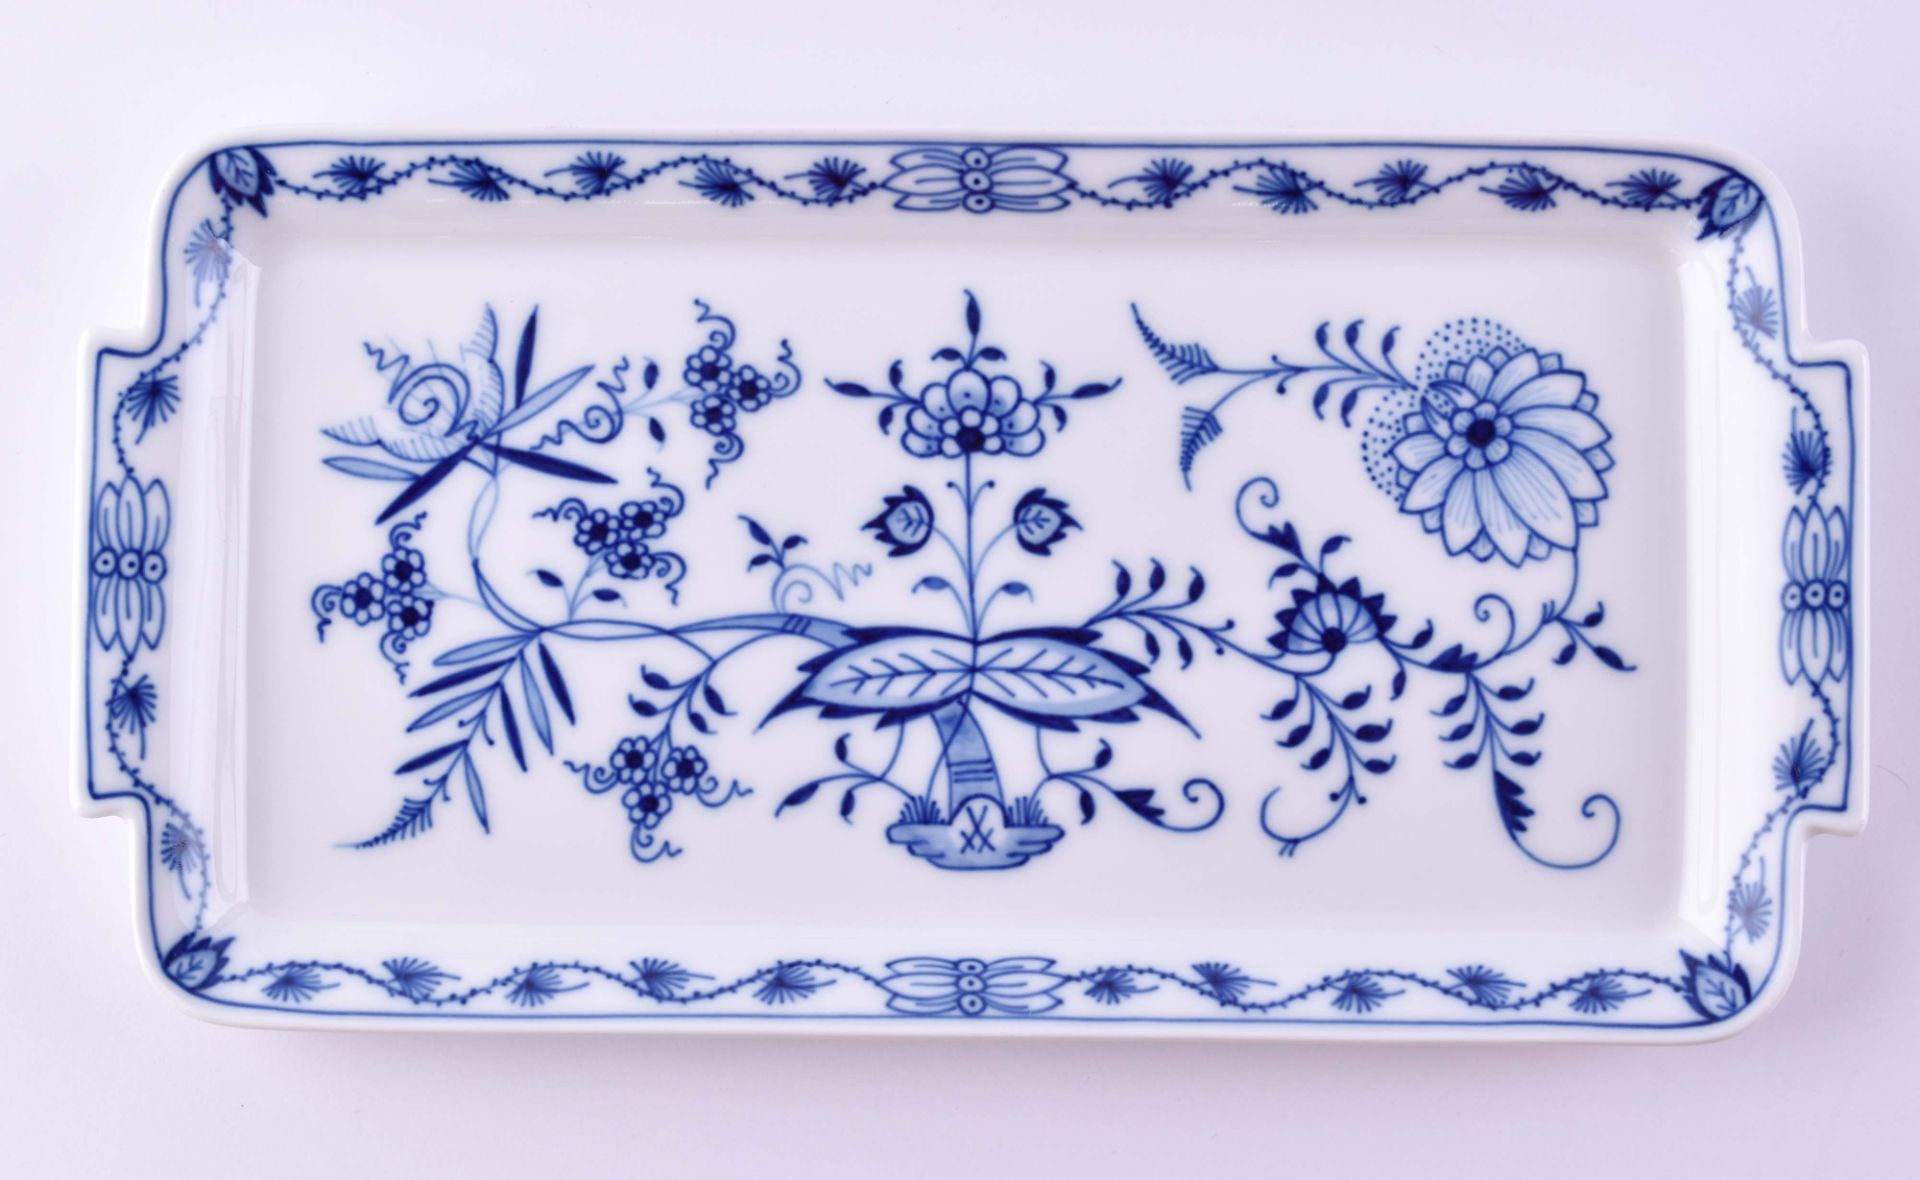  cake plate Meissen - Image 2 of 4